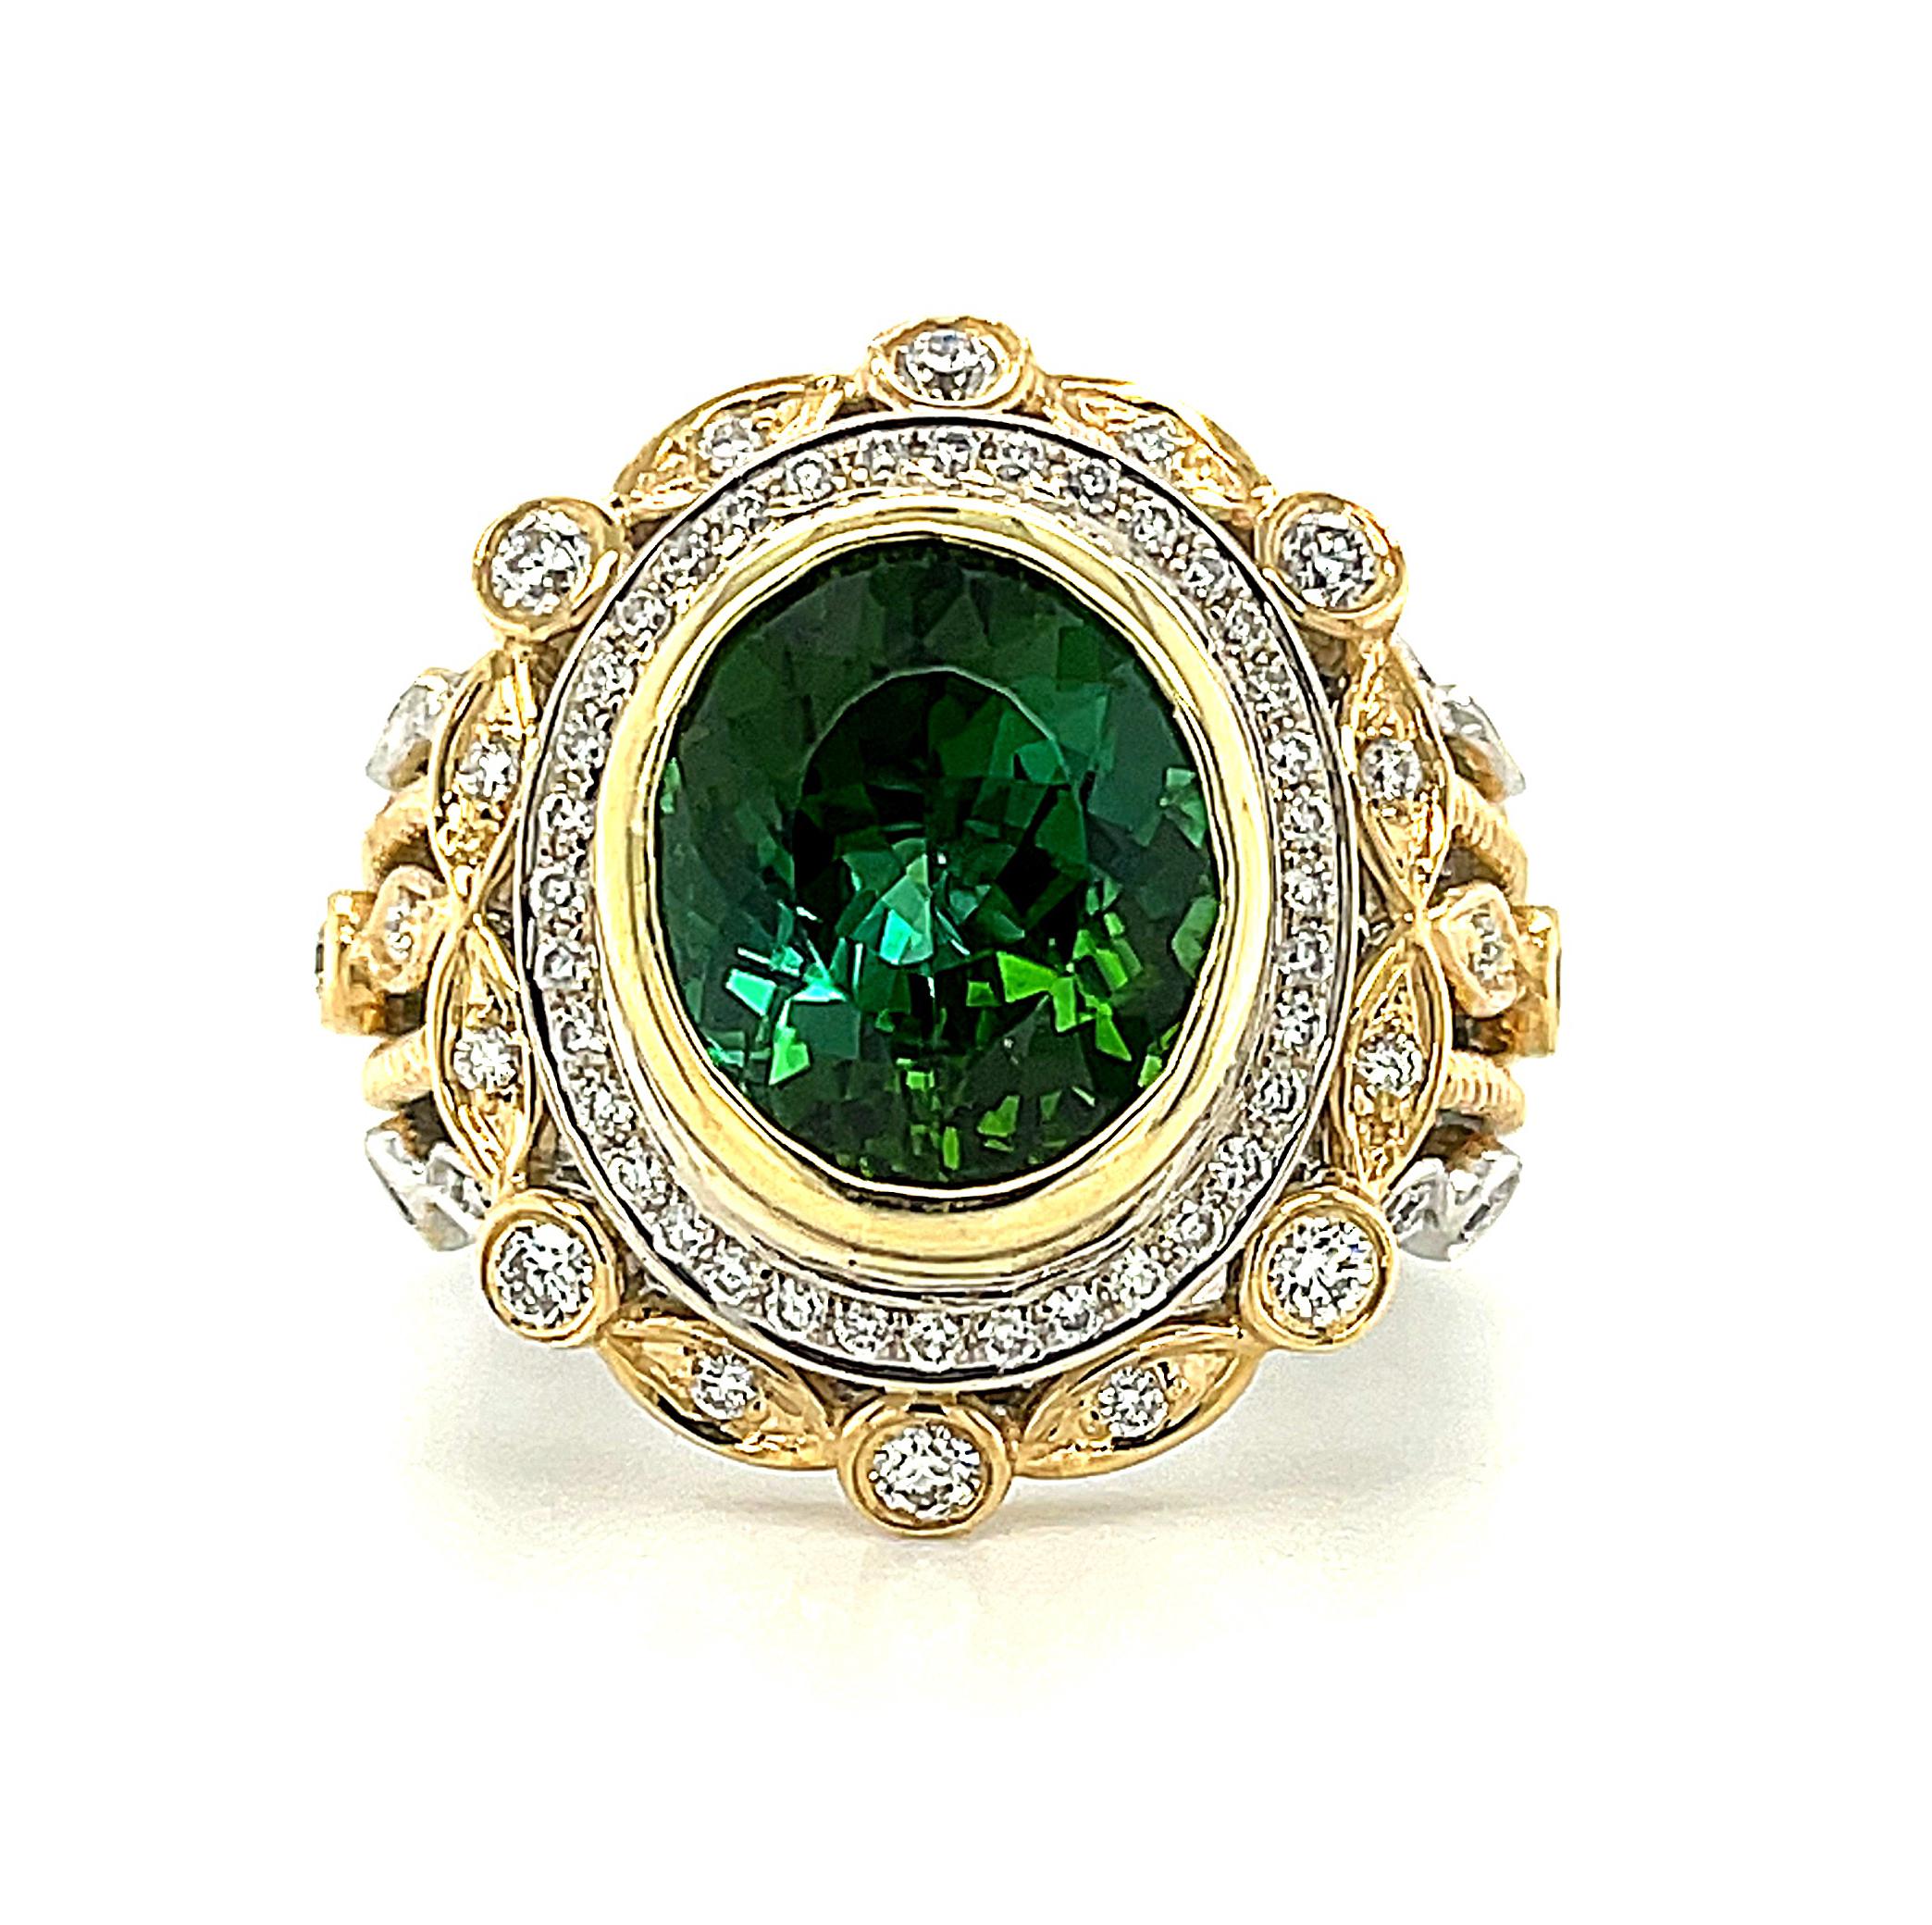 This spectacular ring is a new crown jewel for your collection! The 4.45 carat oval green tourmaline is a vibrant green color that is alive with unusual brilliance and gorgeous blue flashes. Framed by a halo of white diamonds and an elaborate design